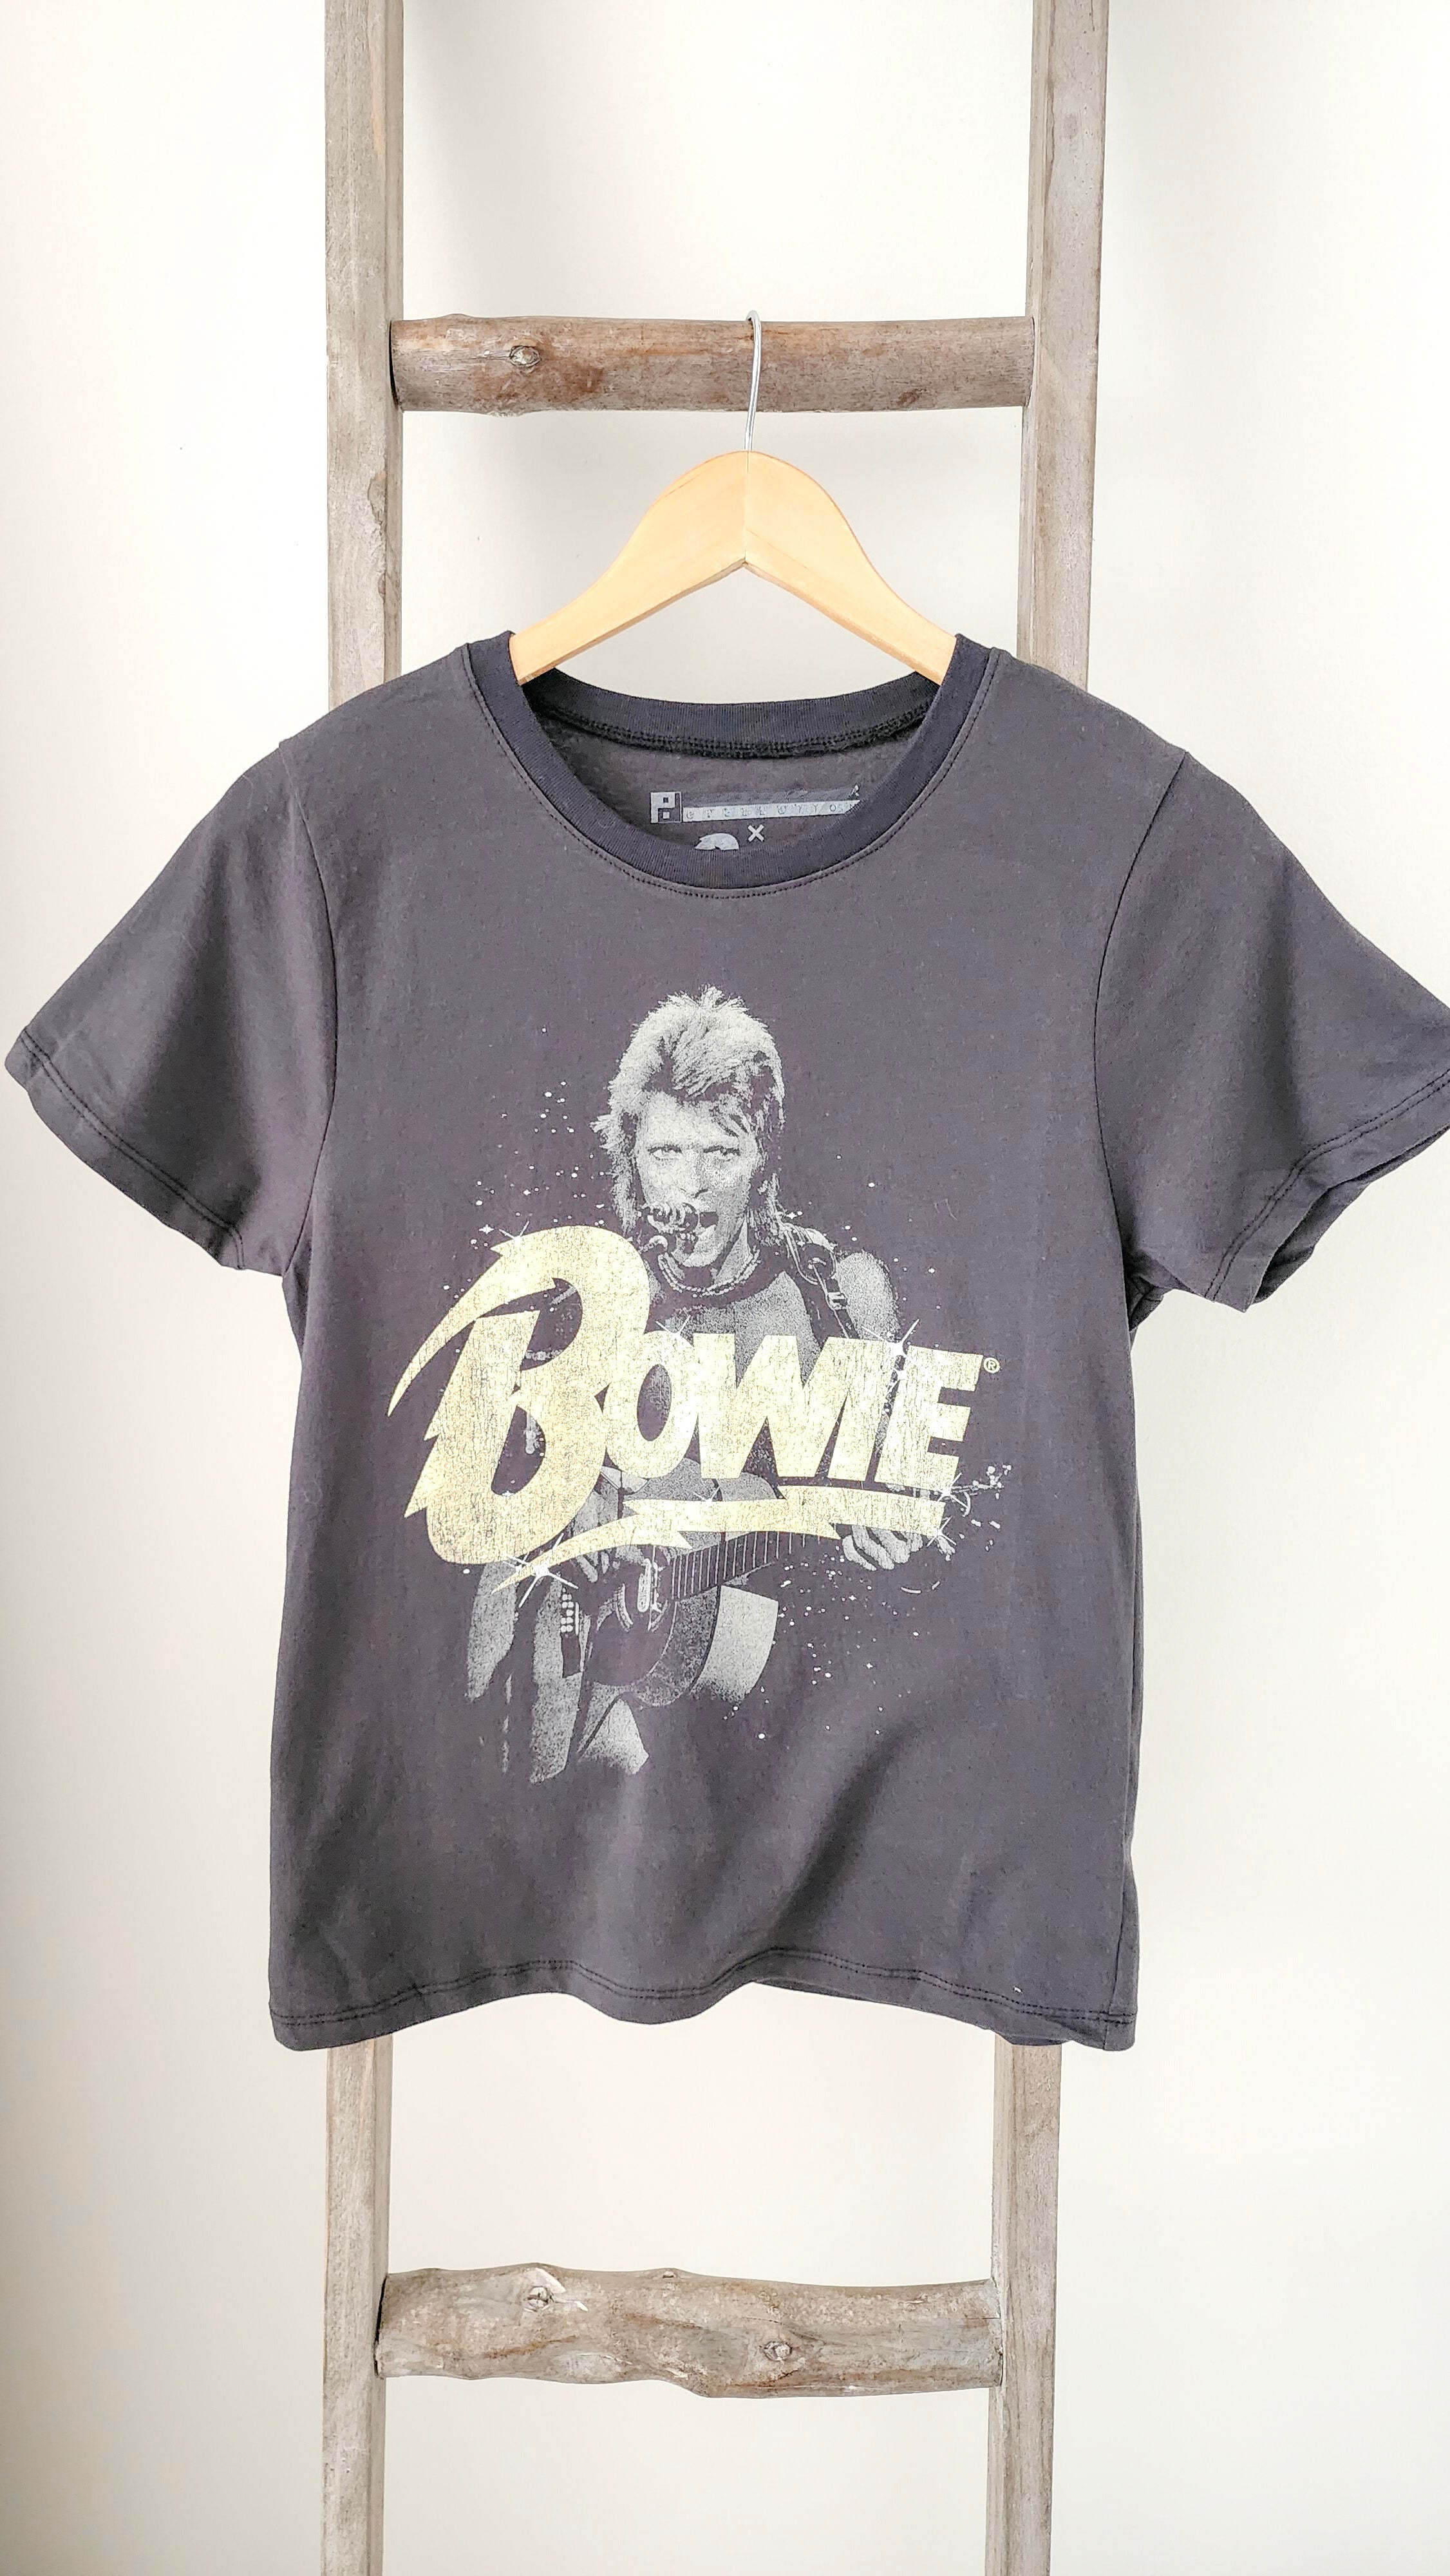 Bowie Band Tee